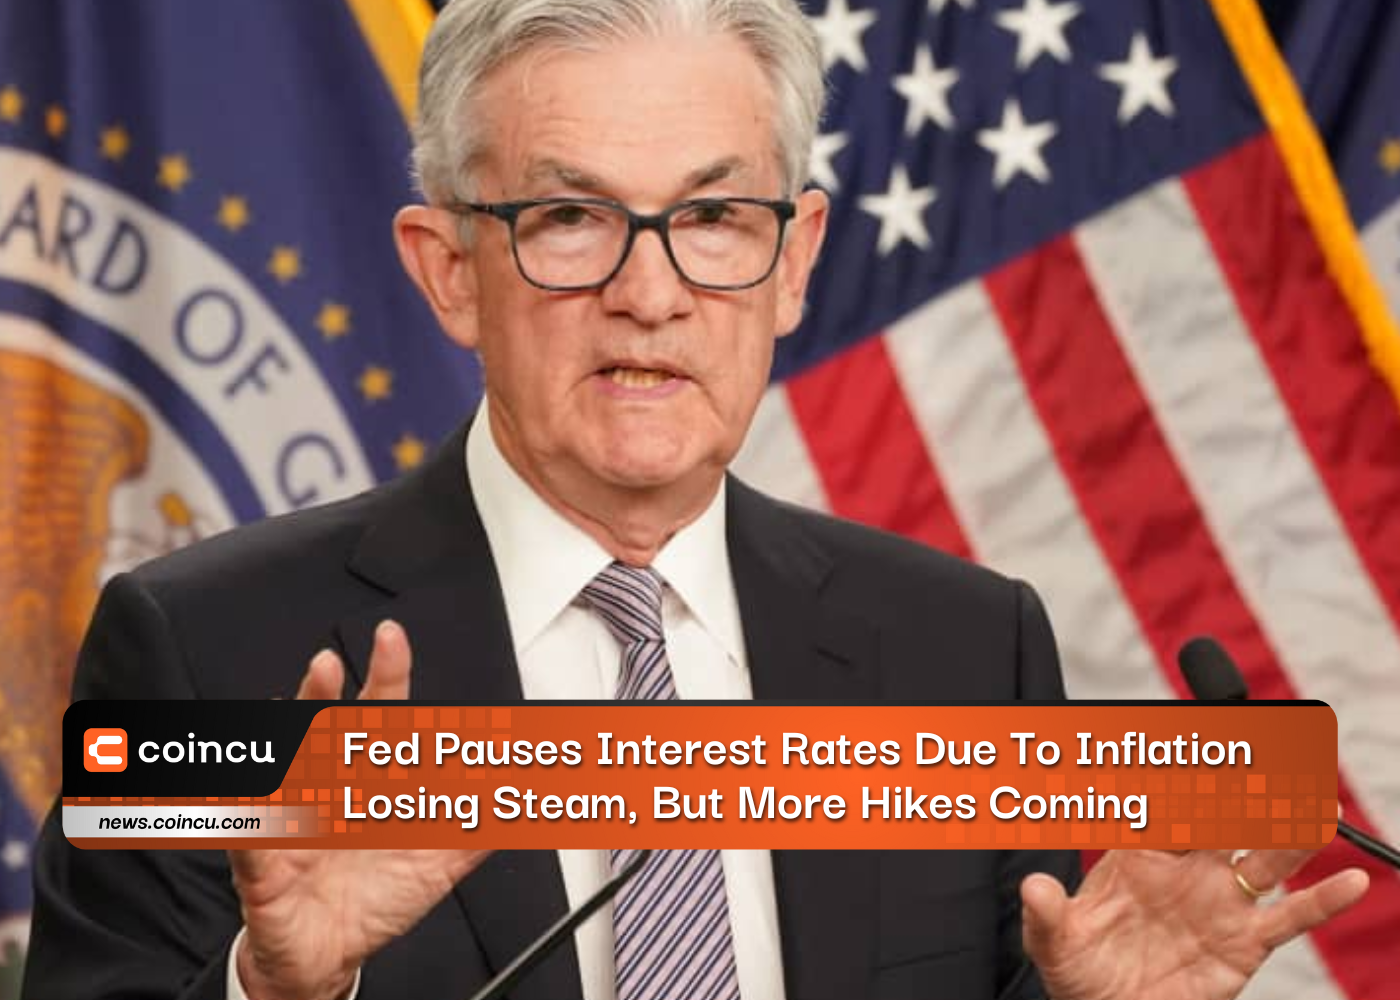 Fed Pauses Interest Rates Due To Inflation Losing Steam, But More Hikes Coming